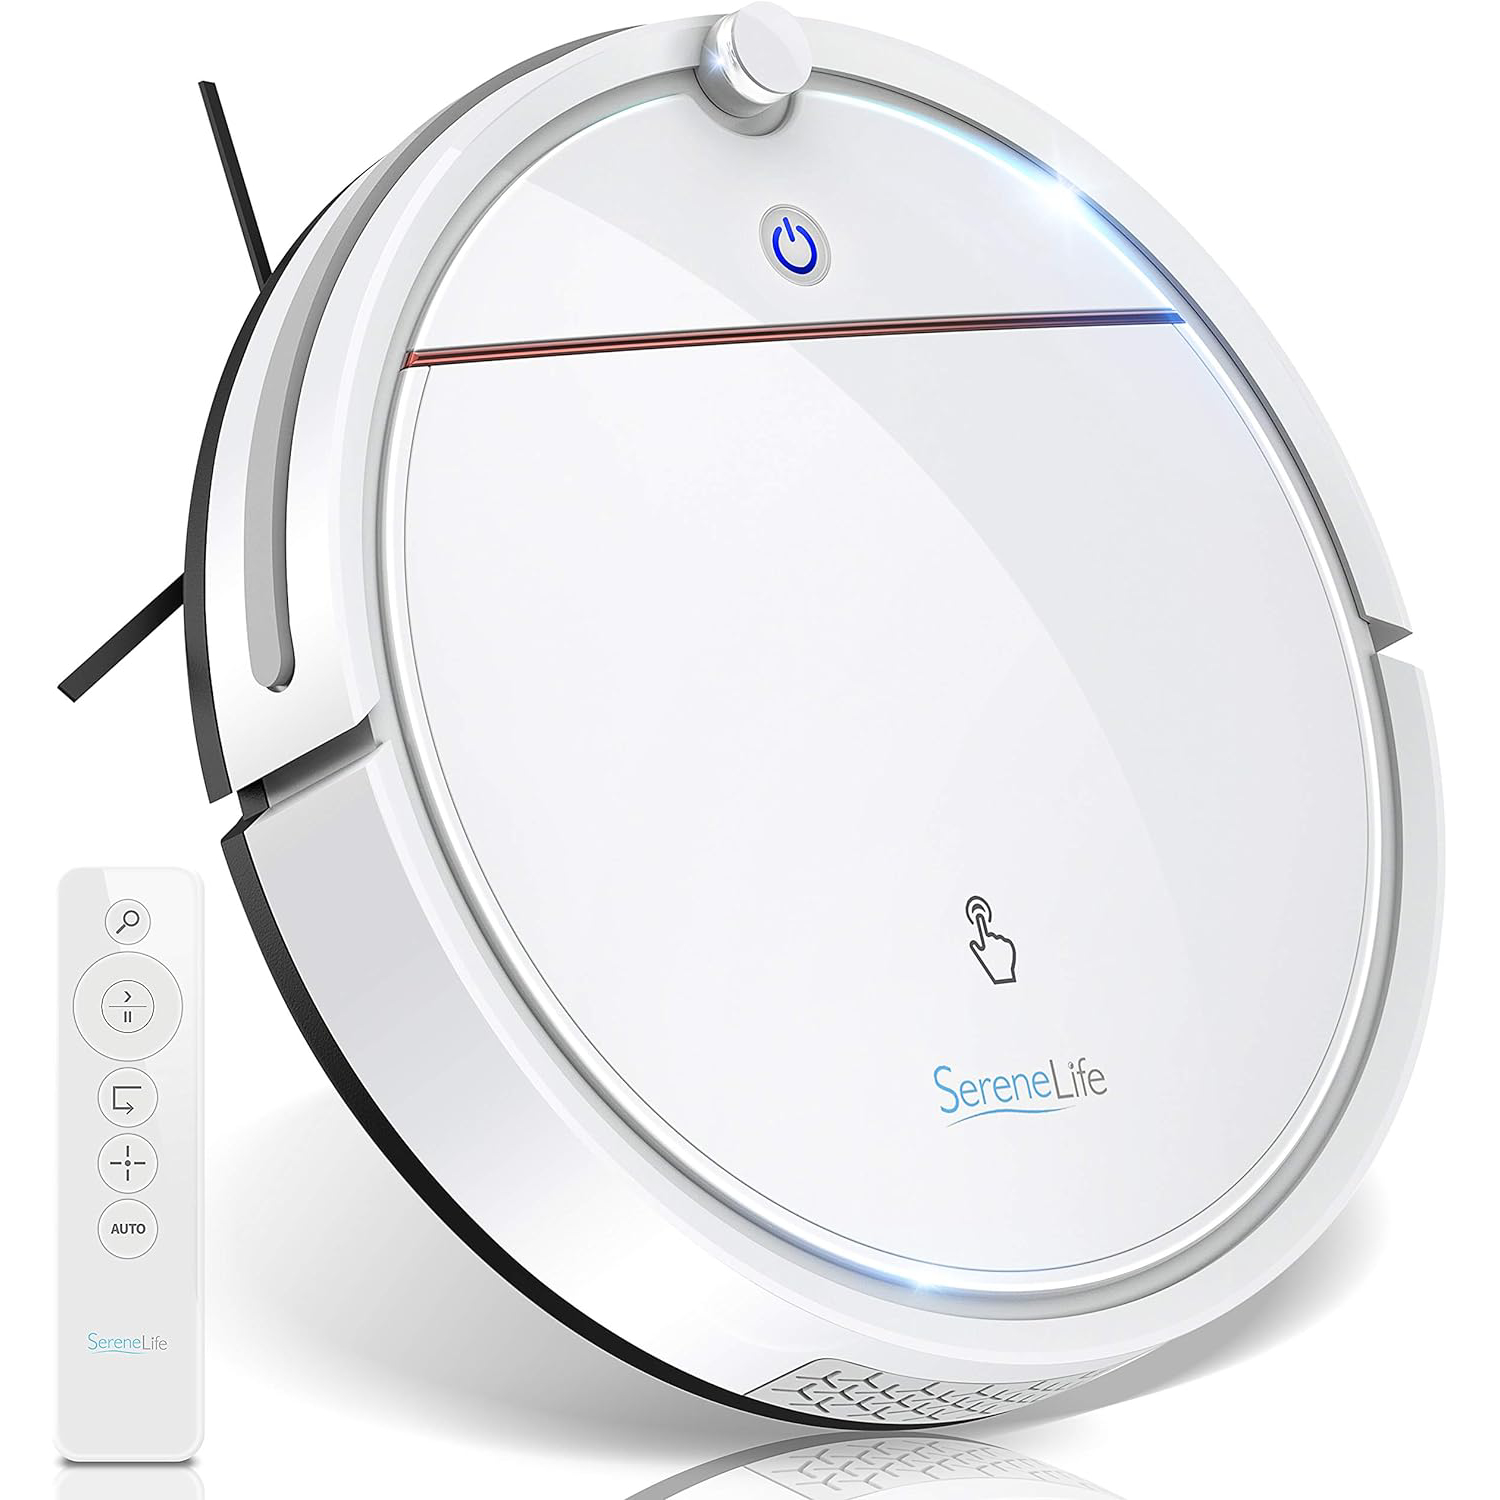 SereneLife Smart Automatic Robot Vacuum Cleaner